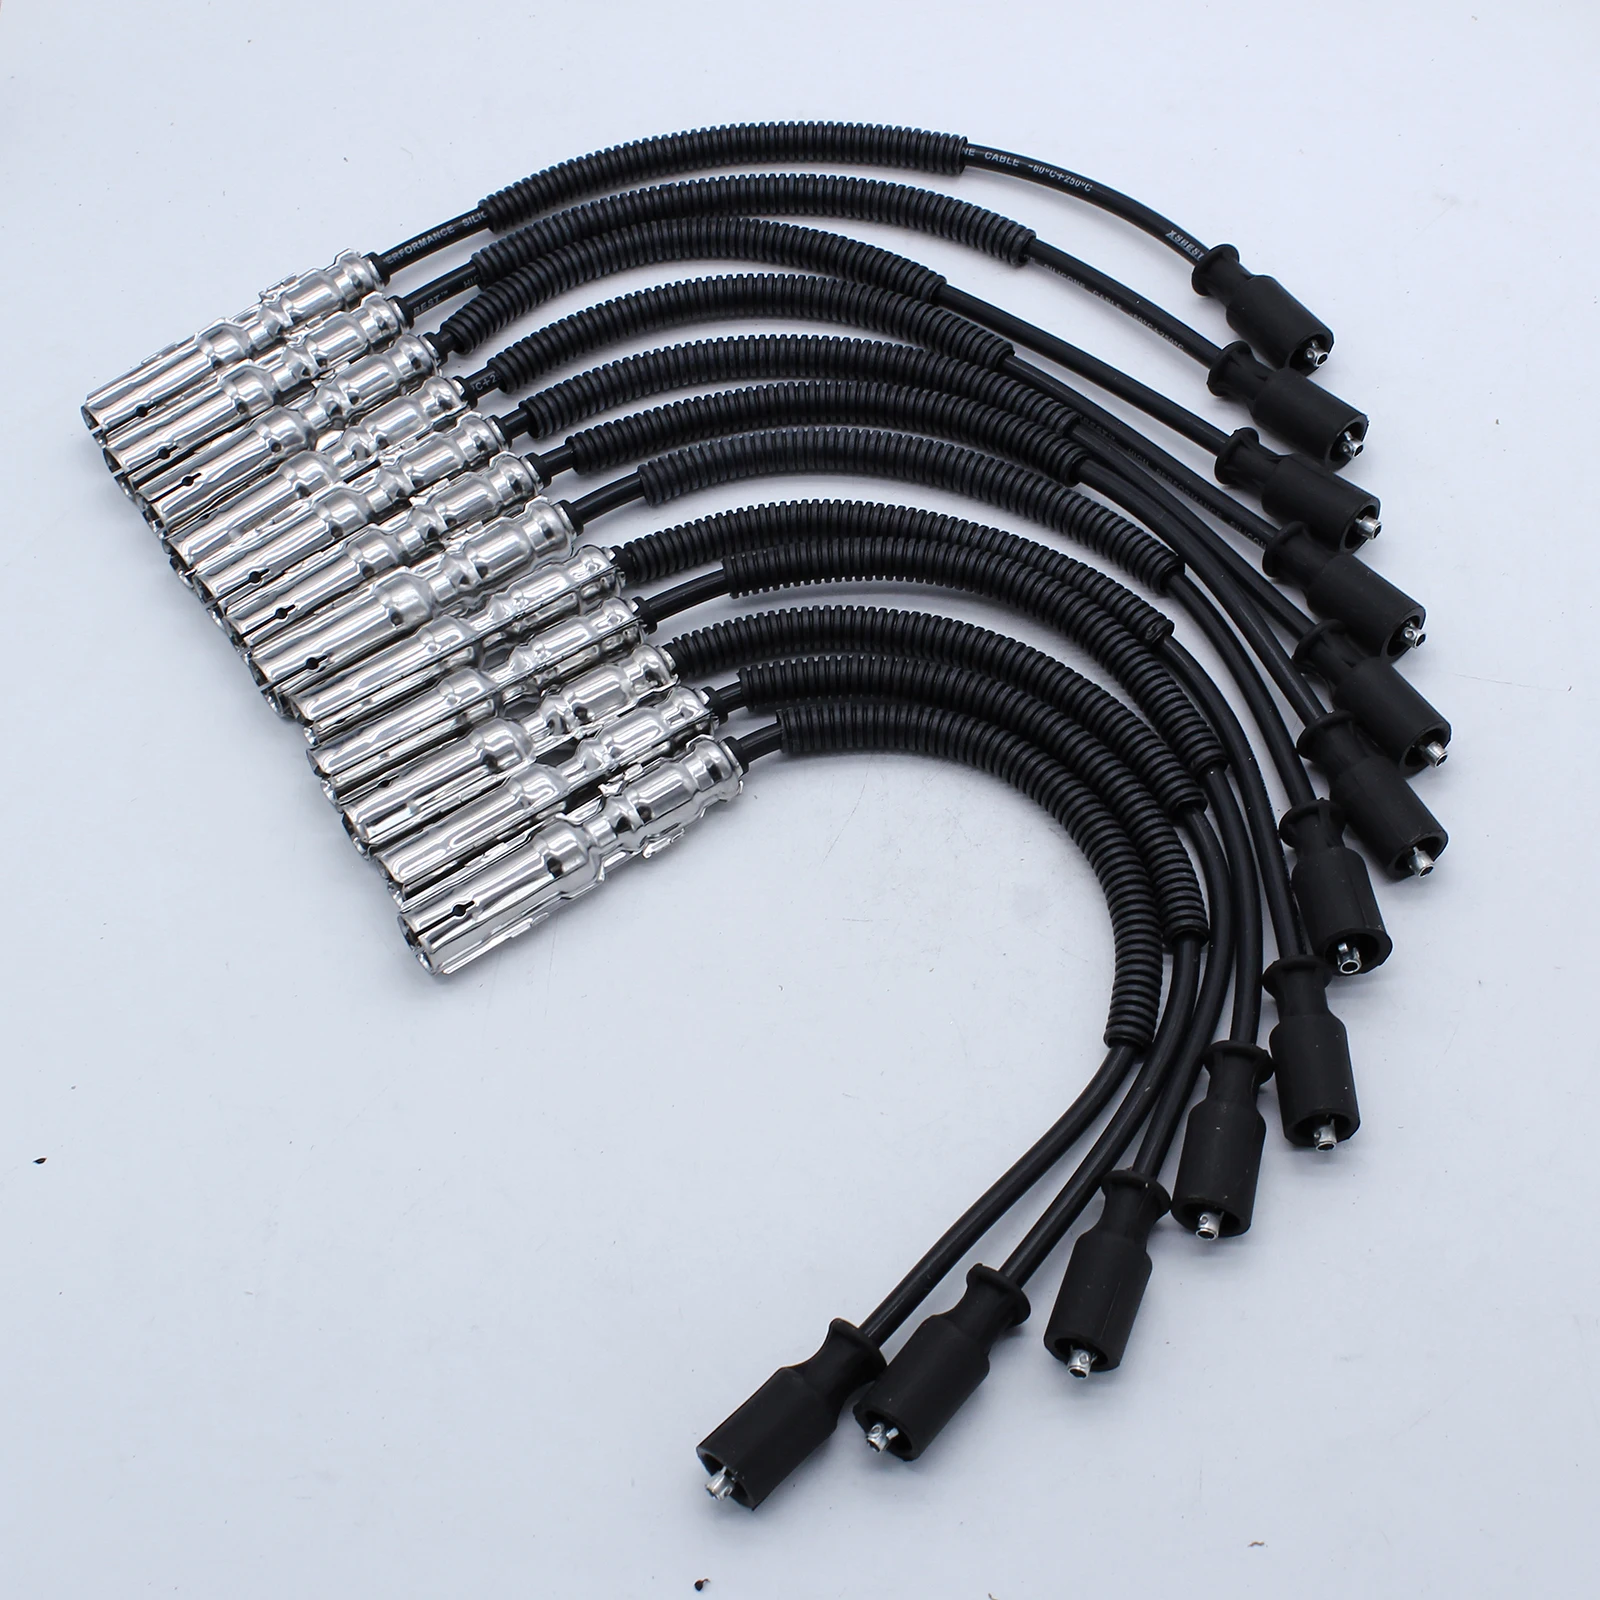 New 1121500118 Spark Plug Ignition Wire Set Fit for  C-Class C240 C280 C32 AMG C320 CLK320 E320 ML320 ML350 S350